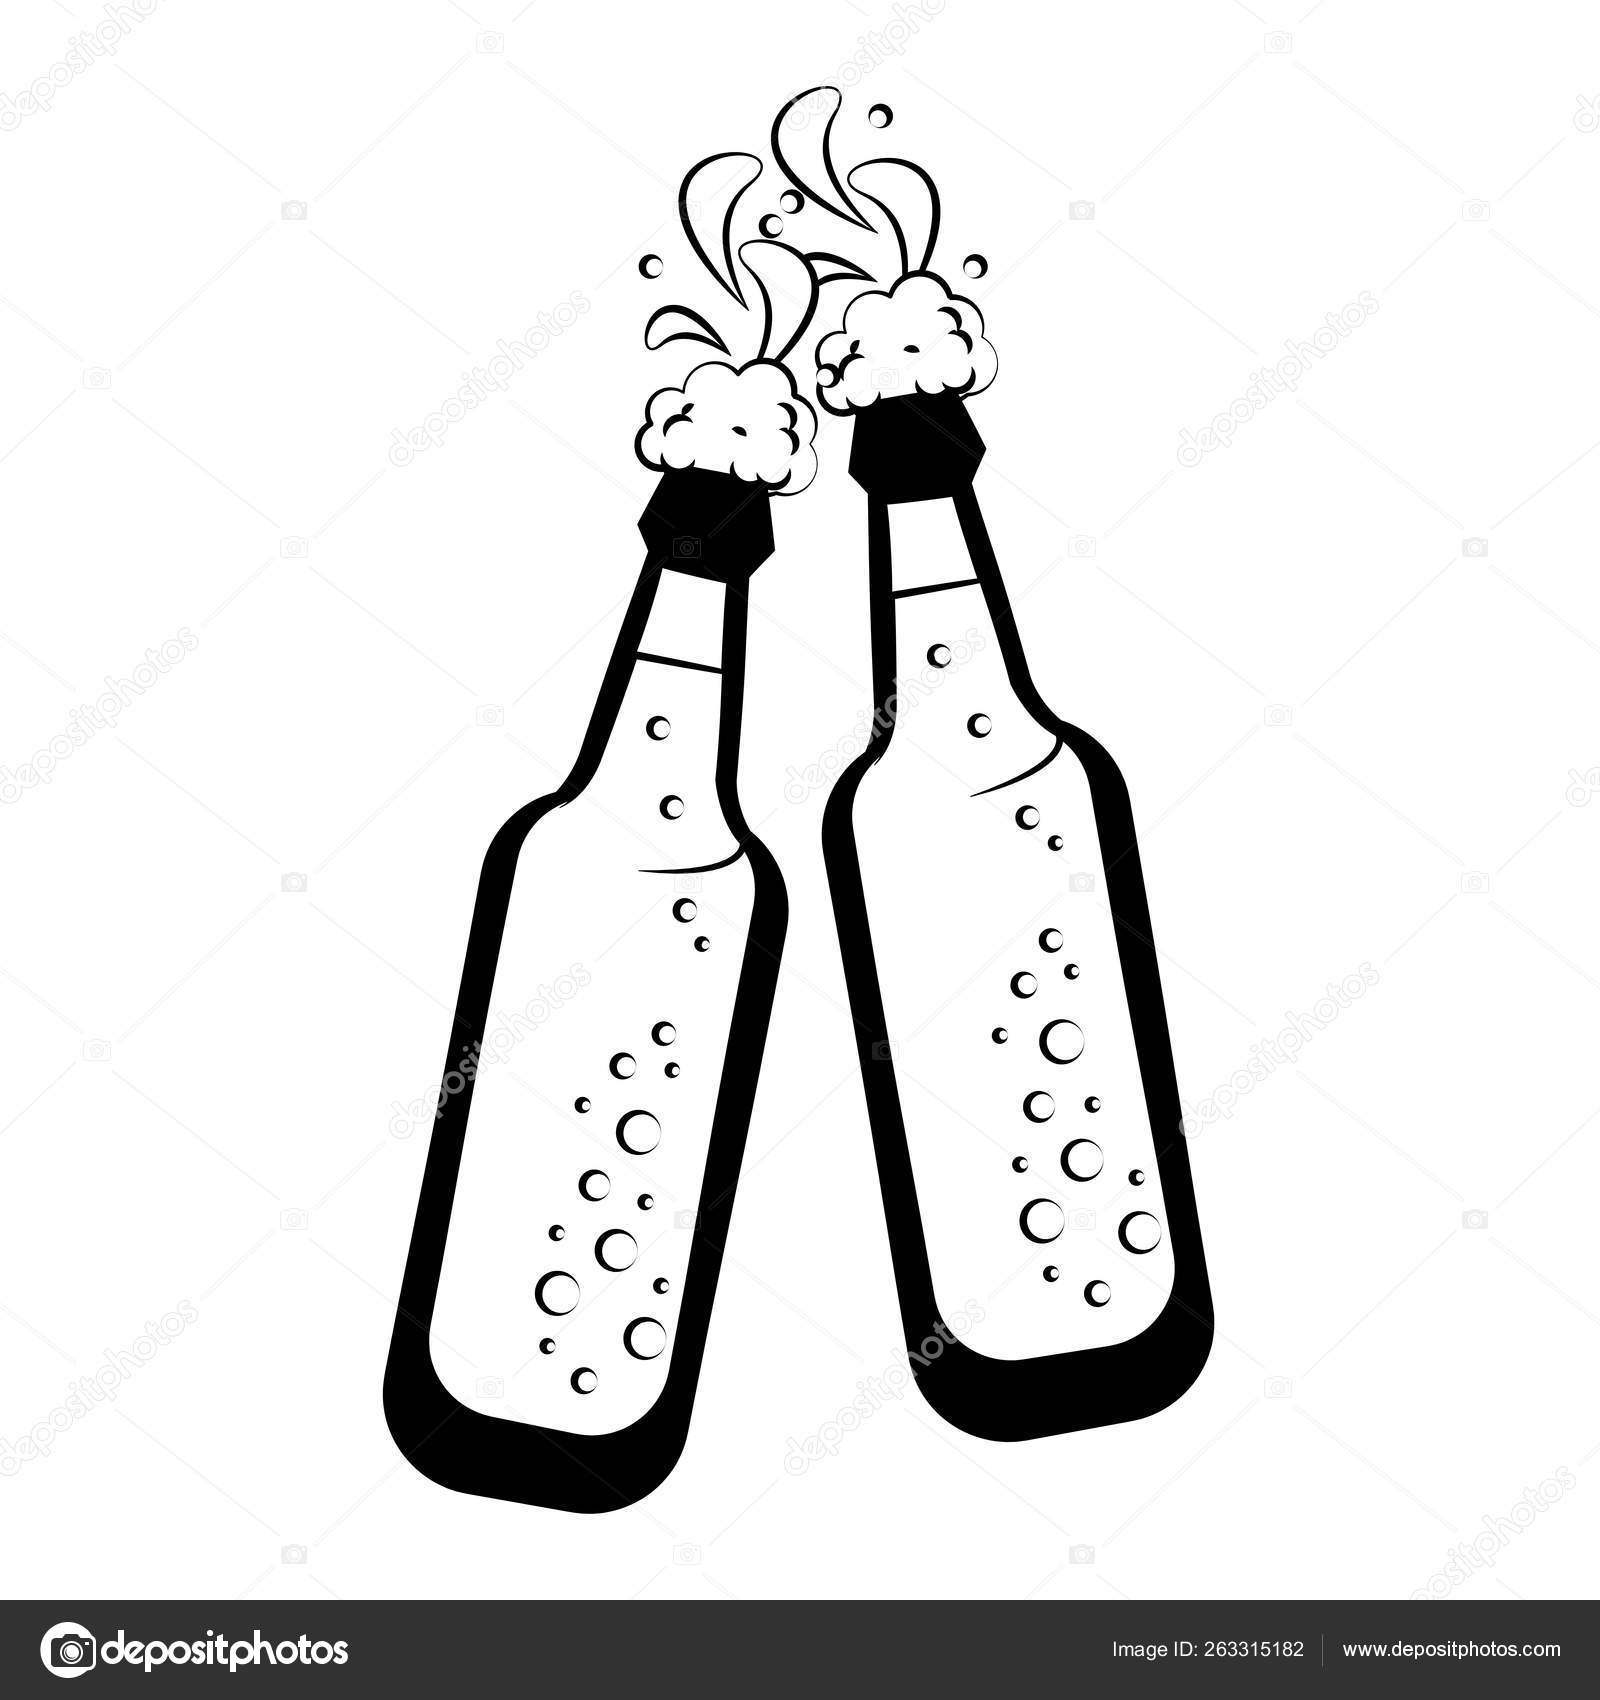 beer bottle clipart black and white